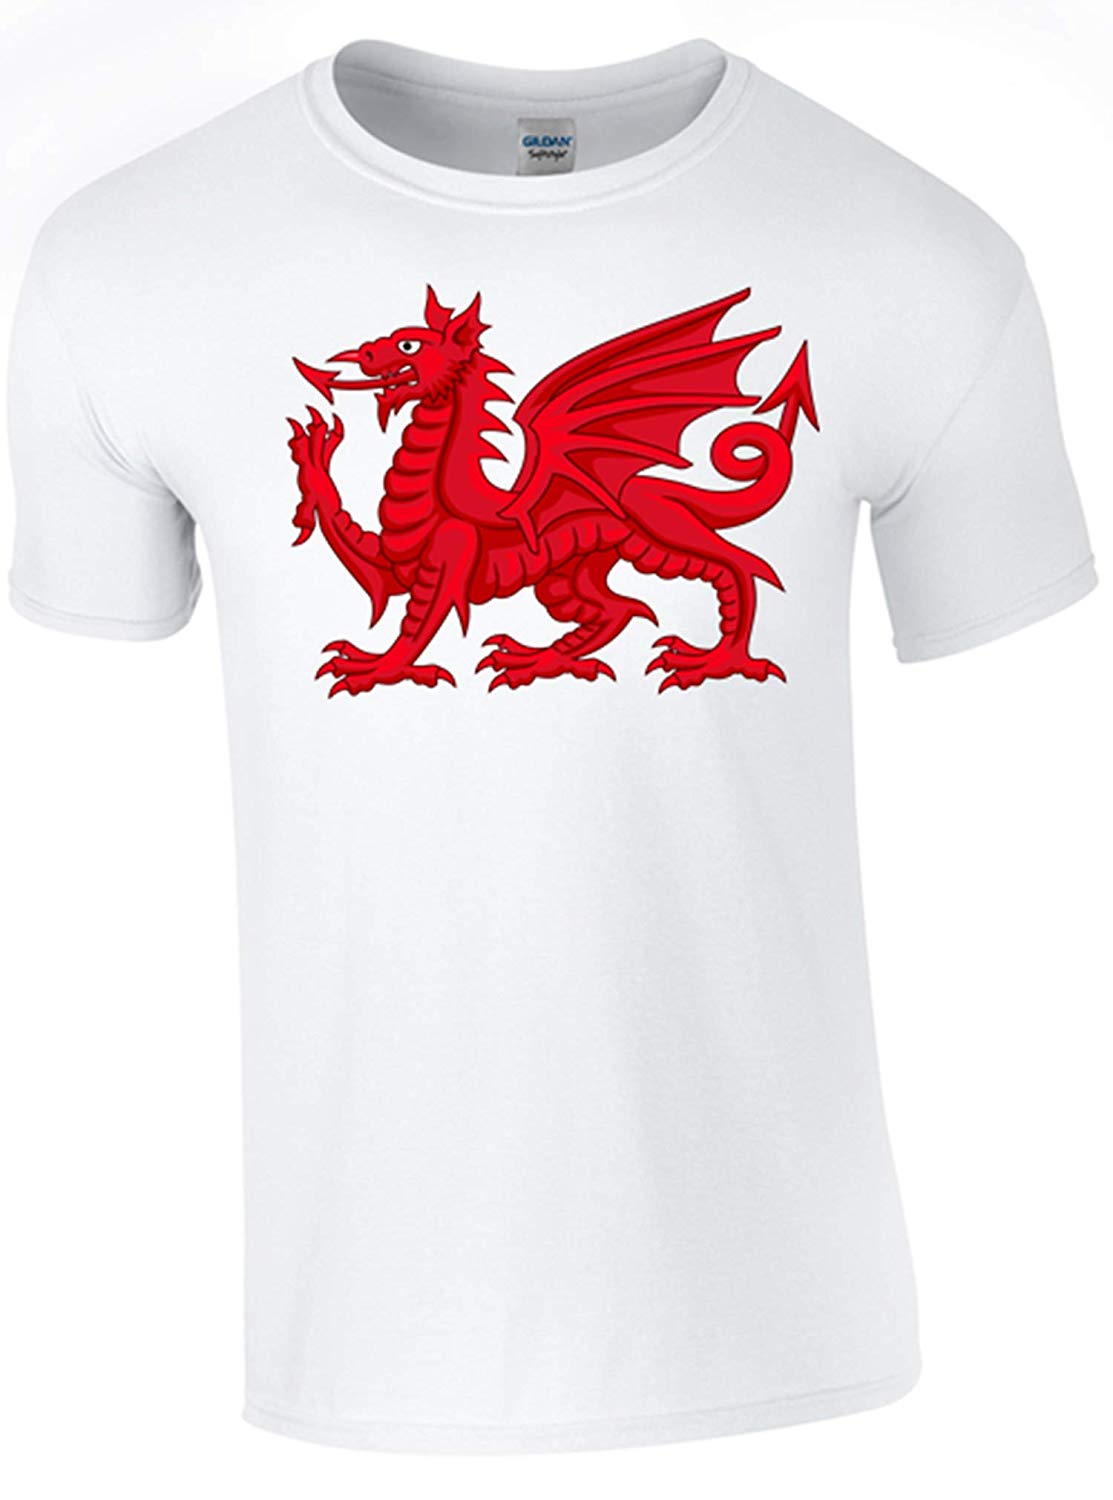 Army 1157 Kit St David's Day Dragon T-Shirt Printed DTG (Direct to Garment) for a Permanent Finish. - Army 1157 kit White / XL Army 1157 Kit Veterans Owned Business